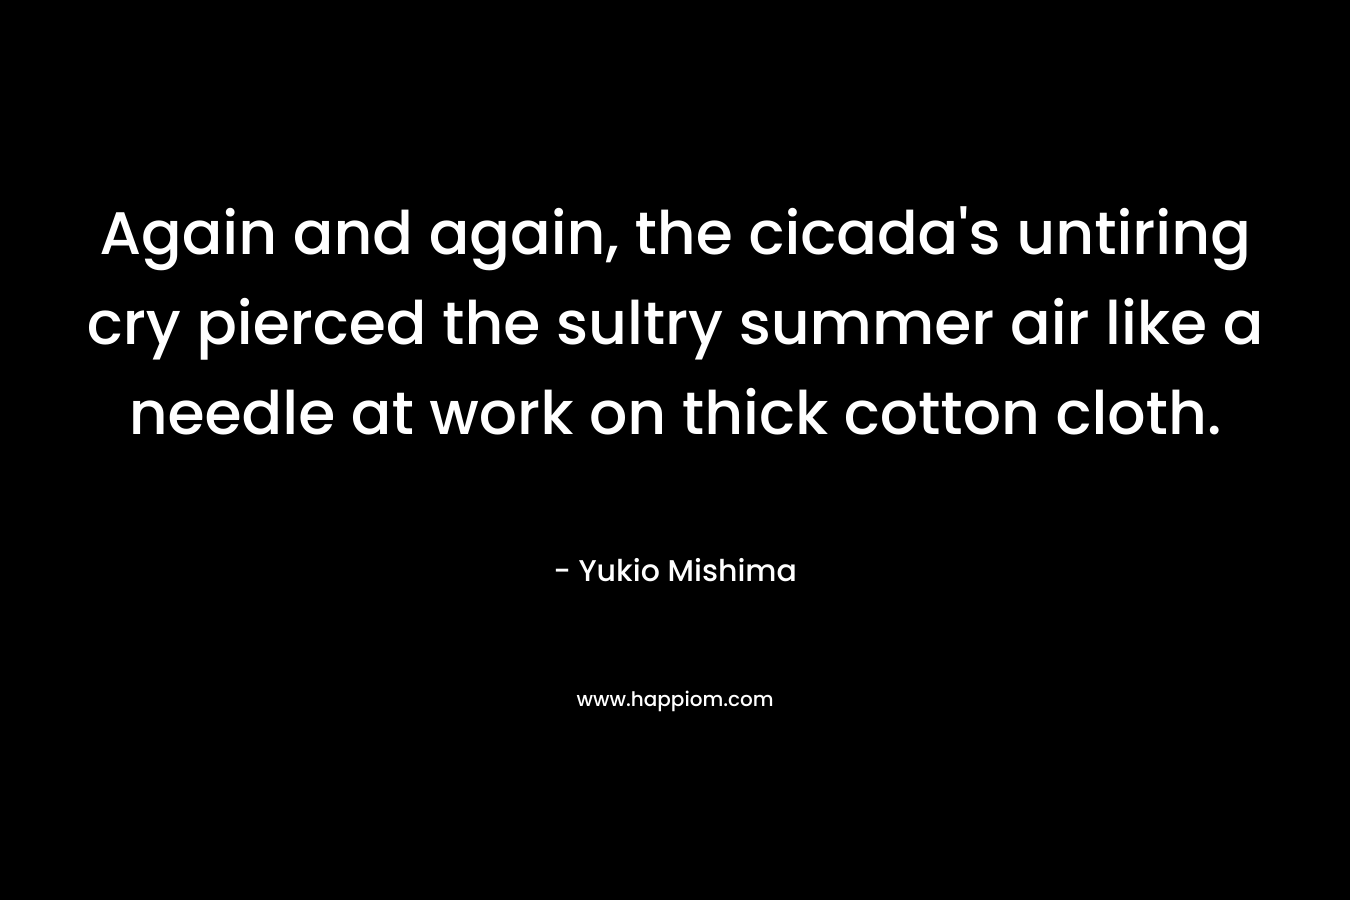 Again and again, the cicada's untiring cry pierced the sultry summer air like a needle at work on thick cotton cloth.